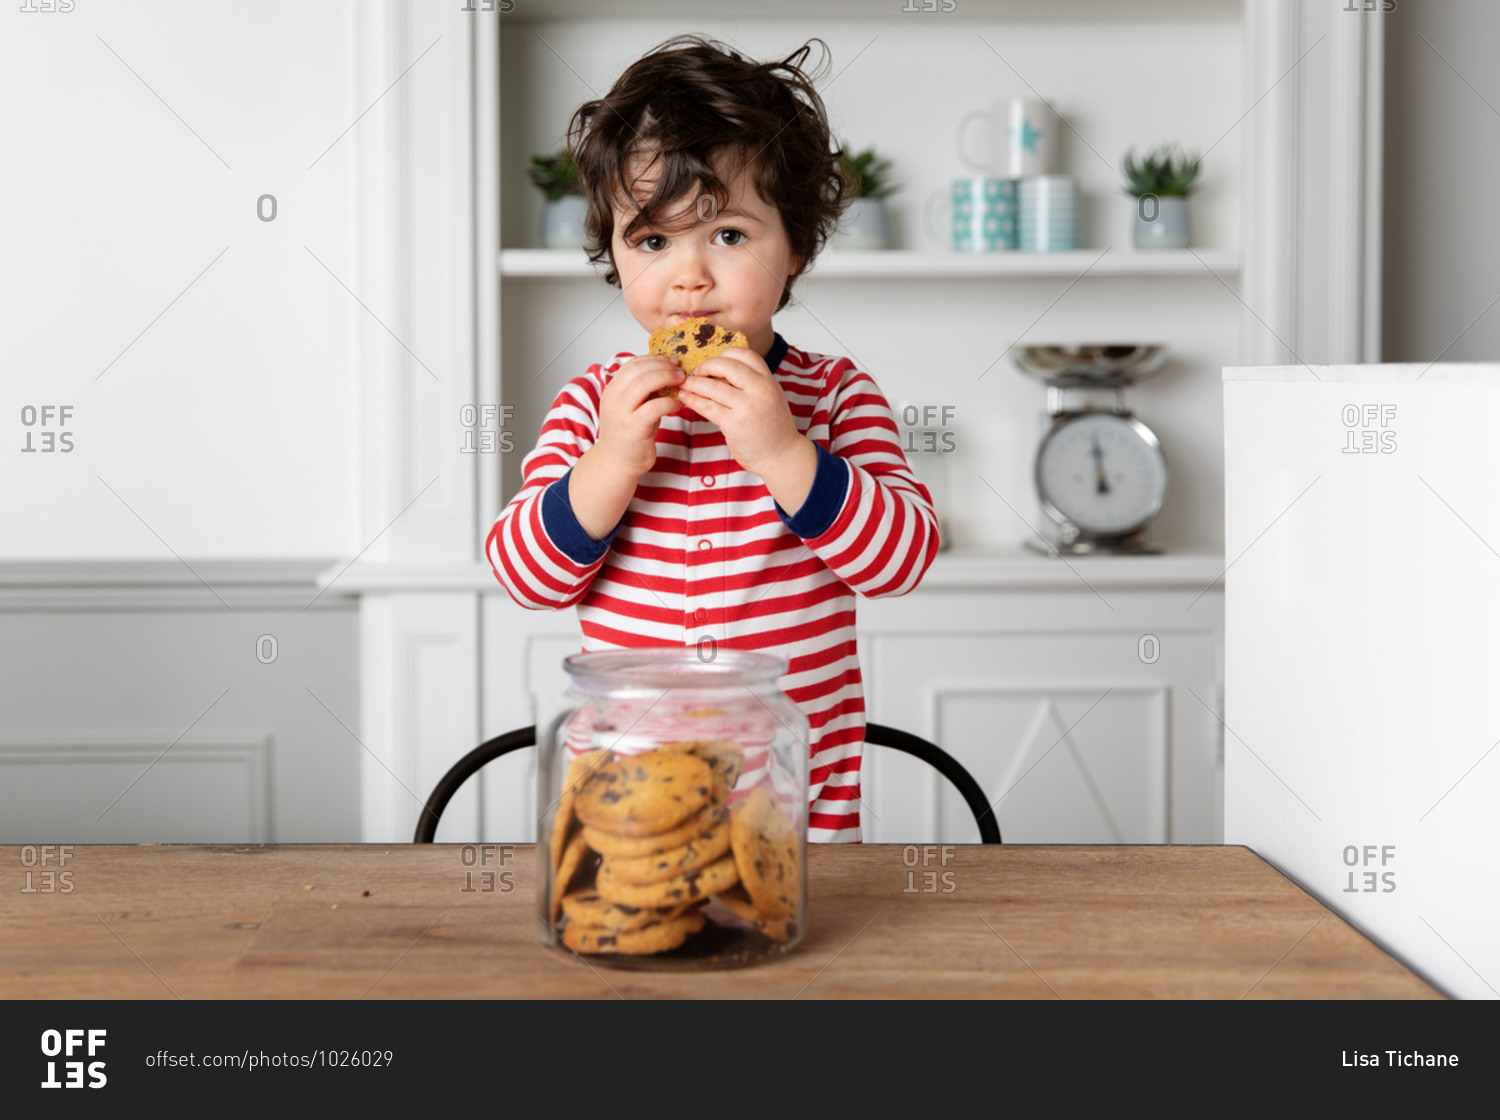 Cute little boy eating a biscuit from cookie jar at kitchen table